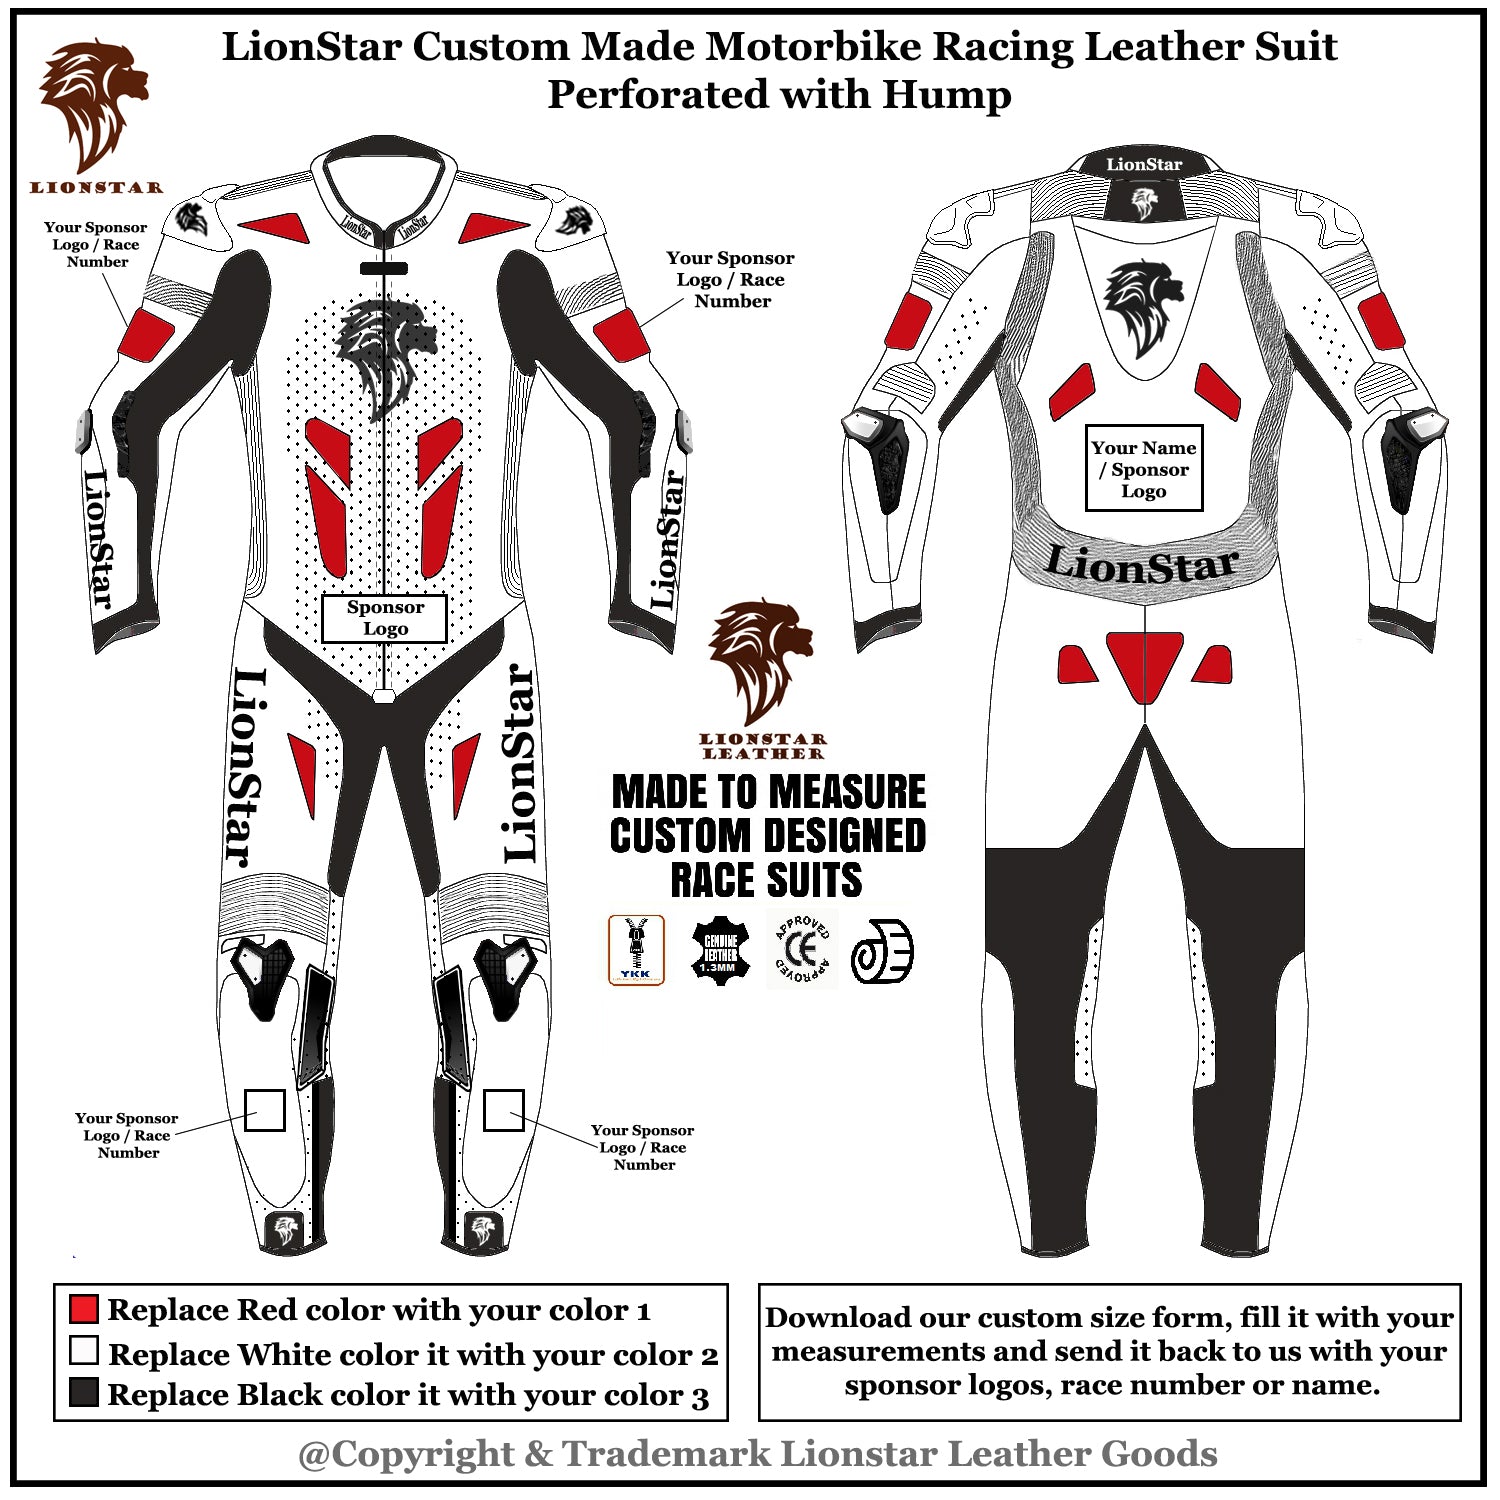 Custom Racing Suit perforated with hump 